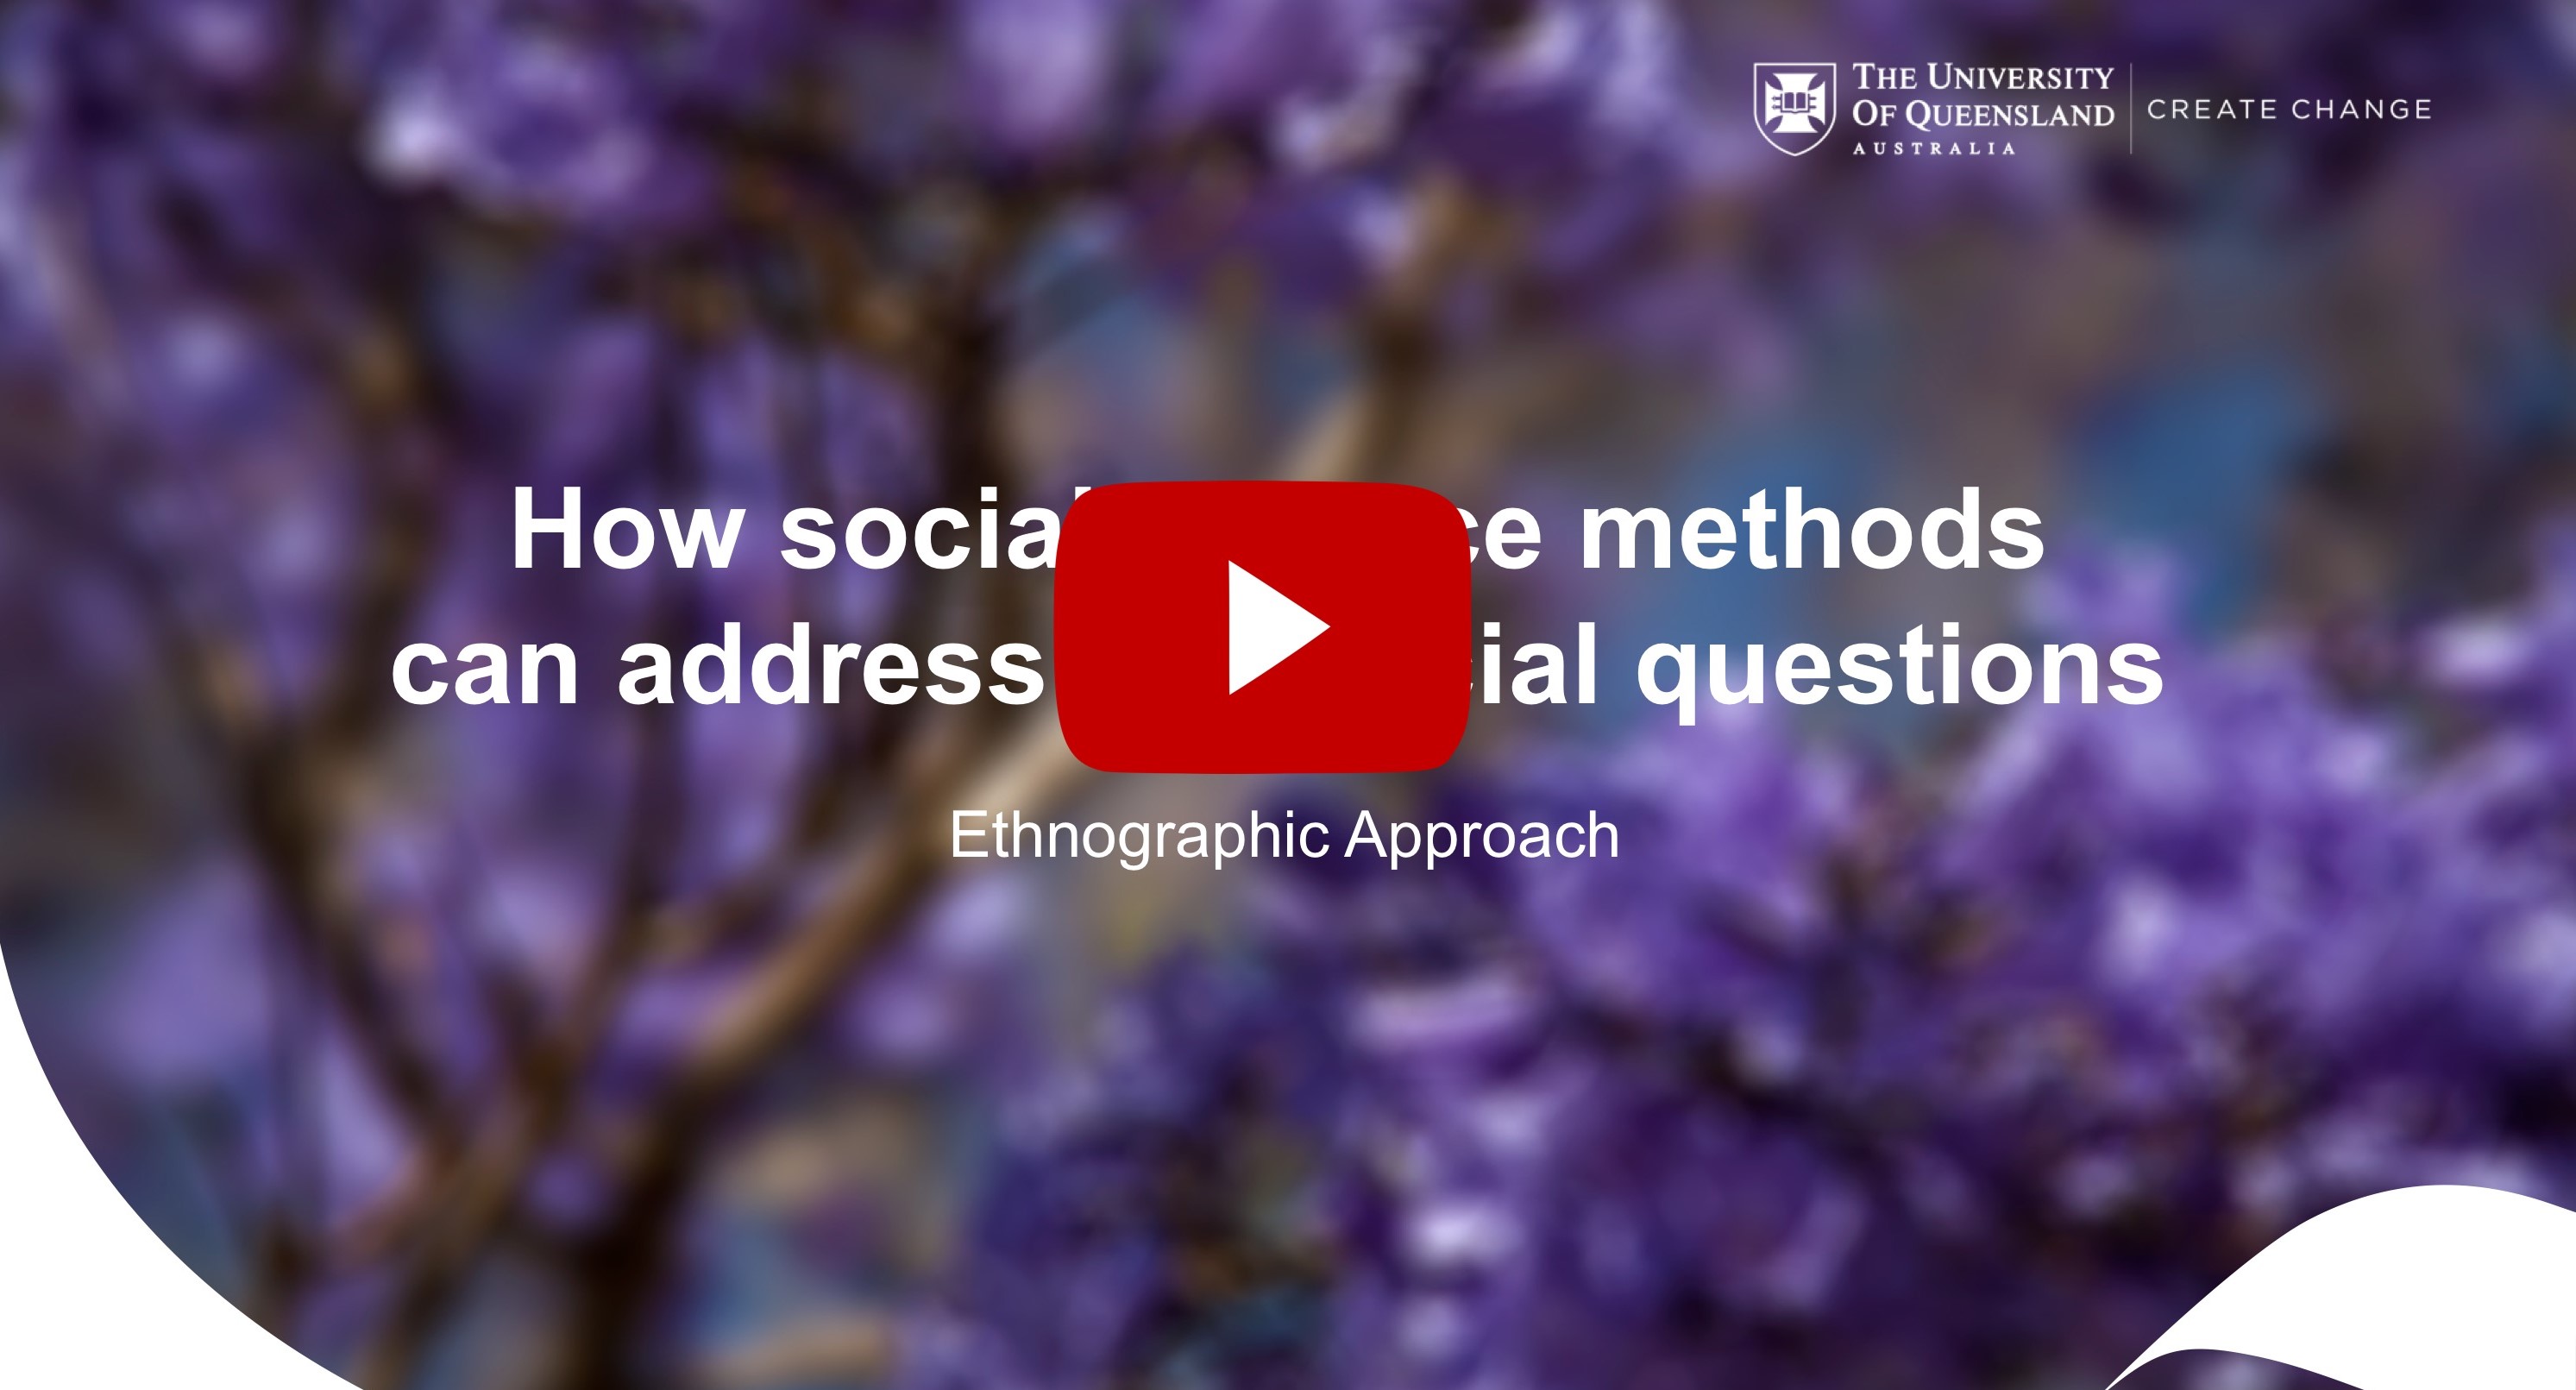 Ethnographic Approach video